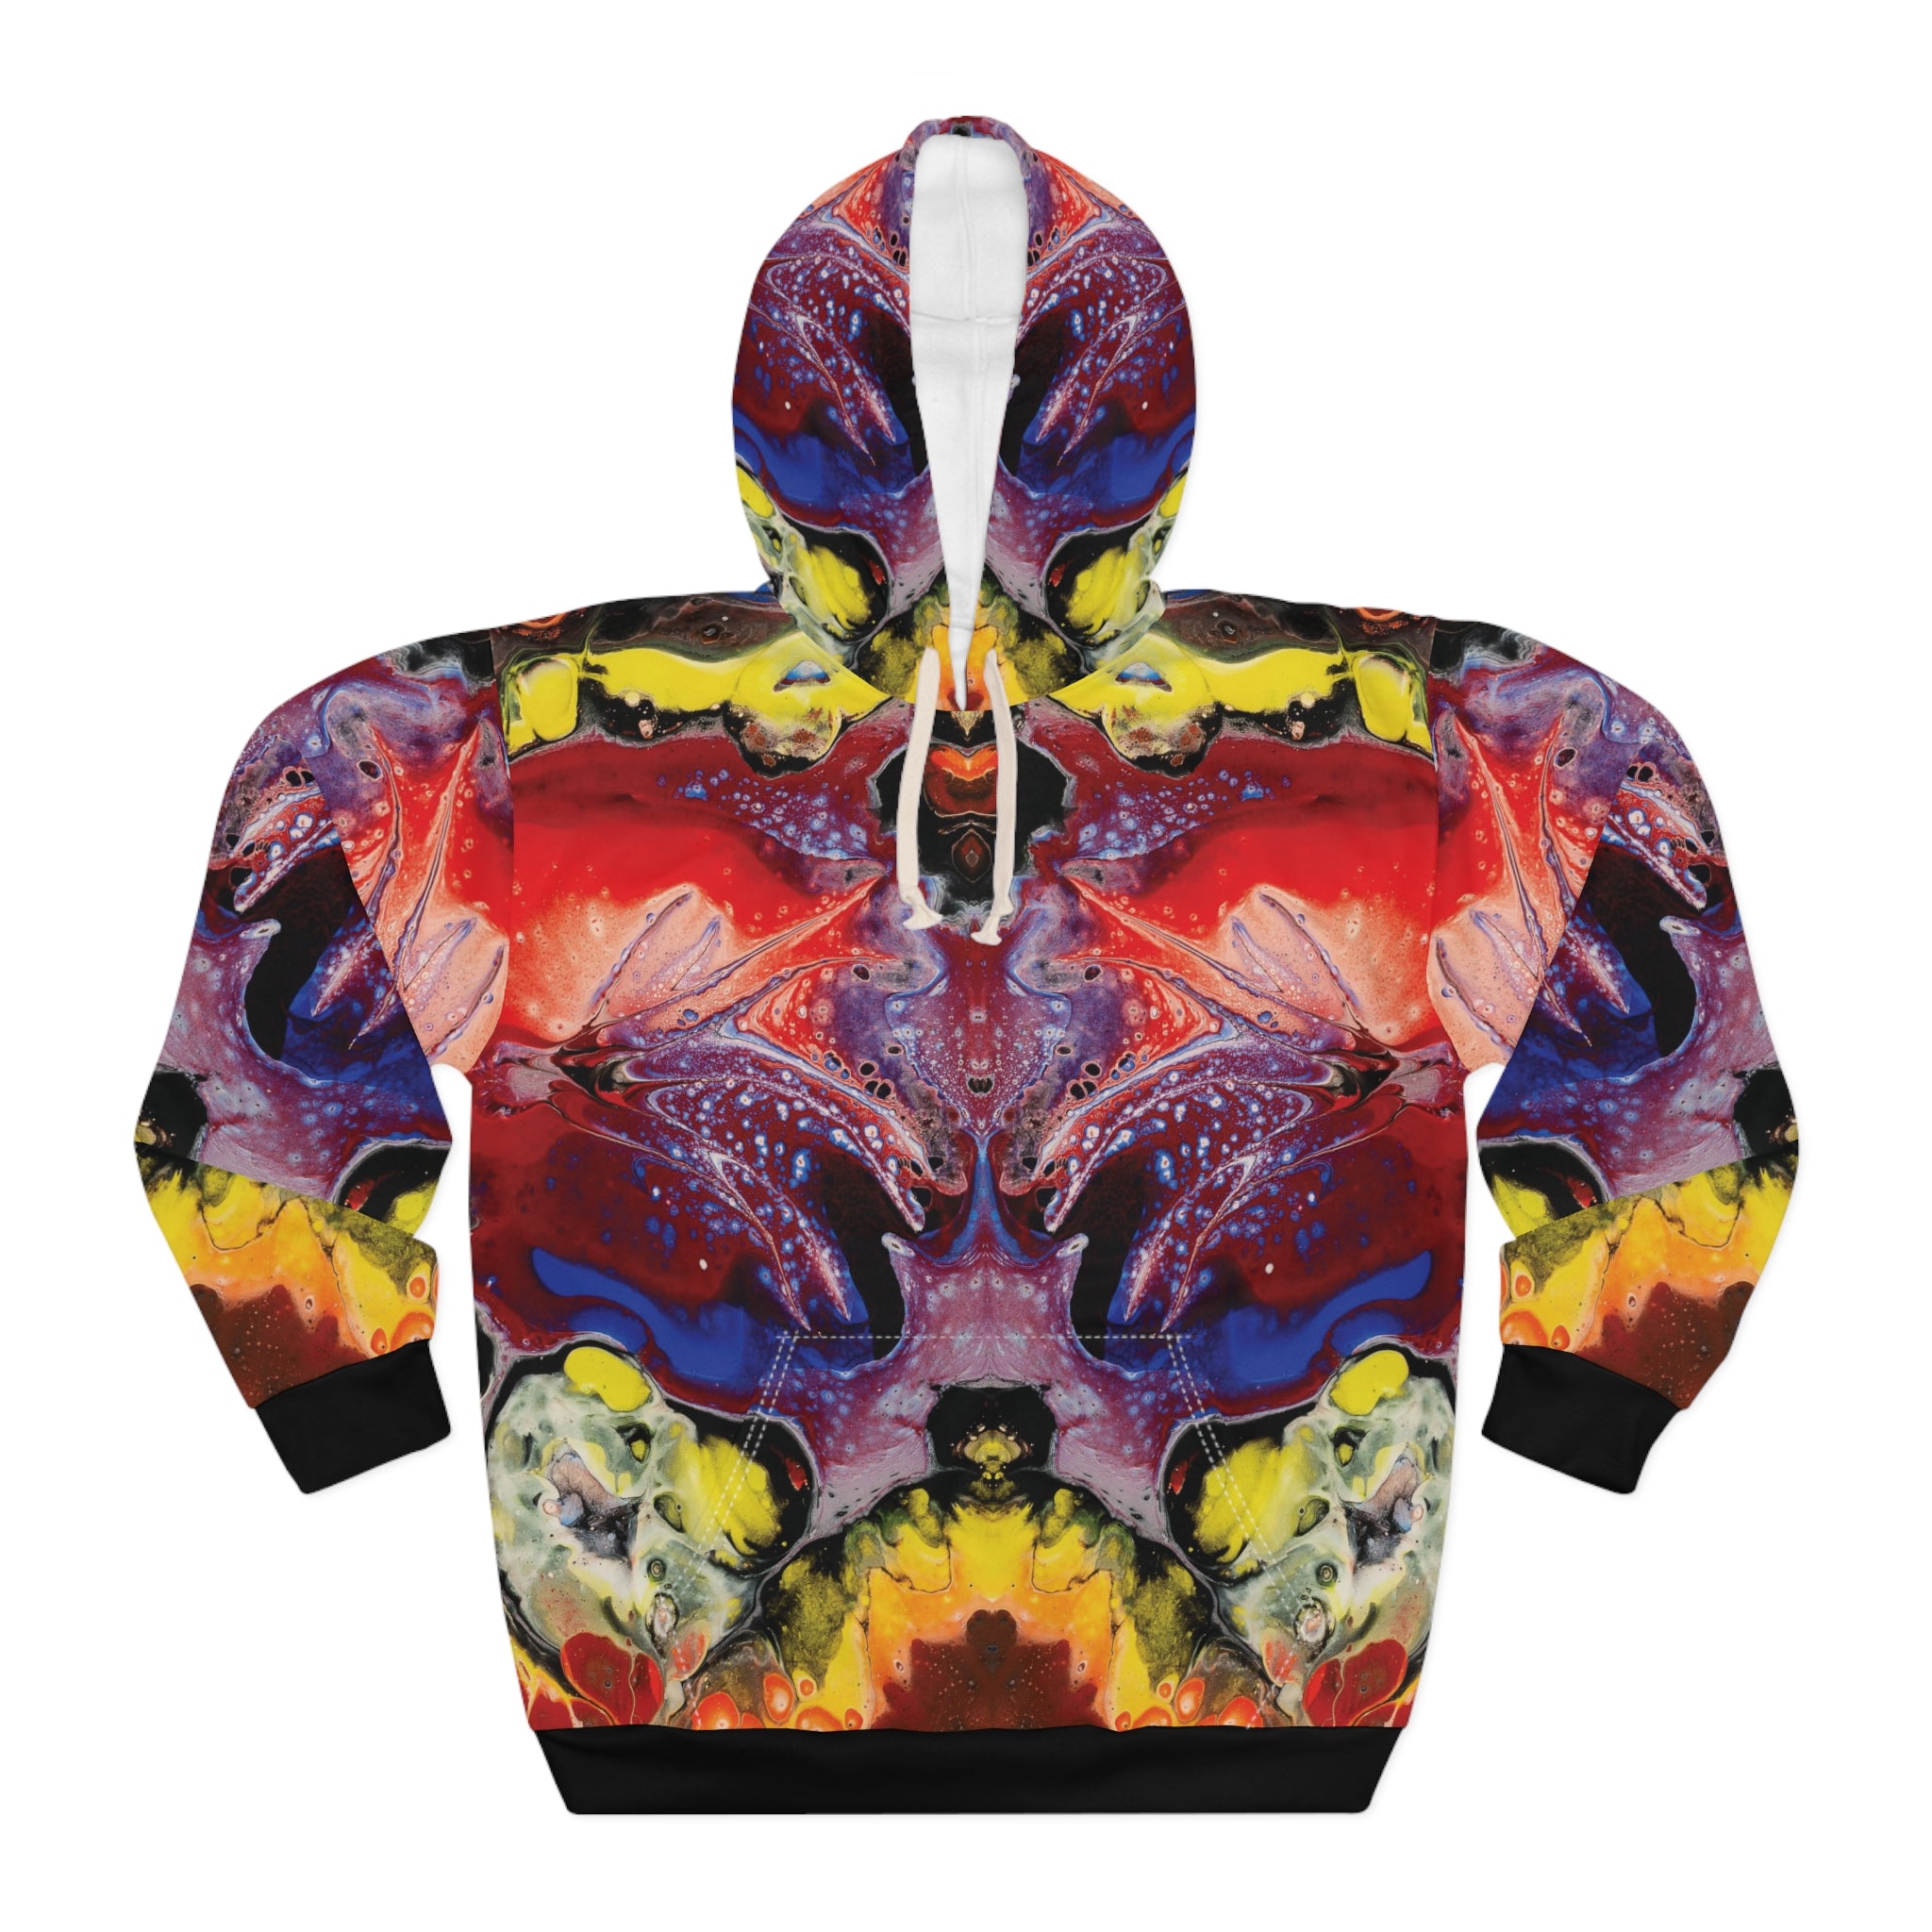 Cameron Creations - Brilliant Vibes - Pullover Hoodie - Front